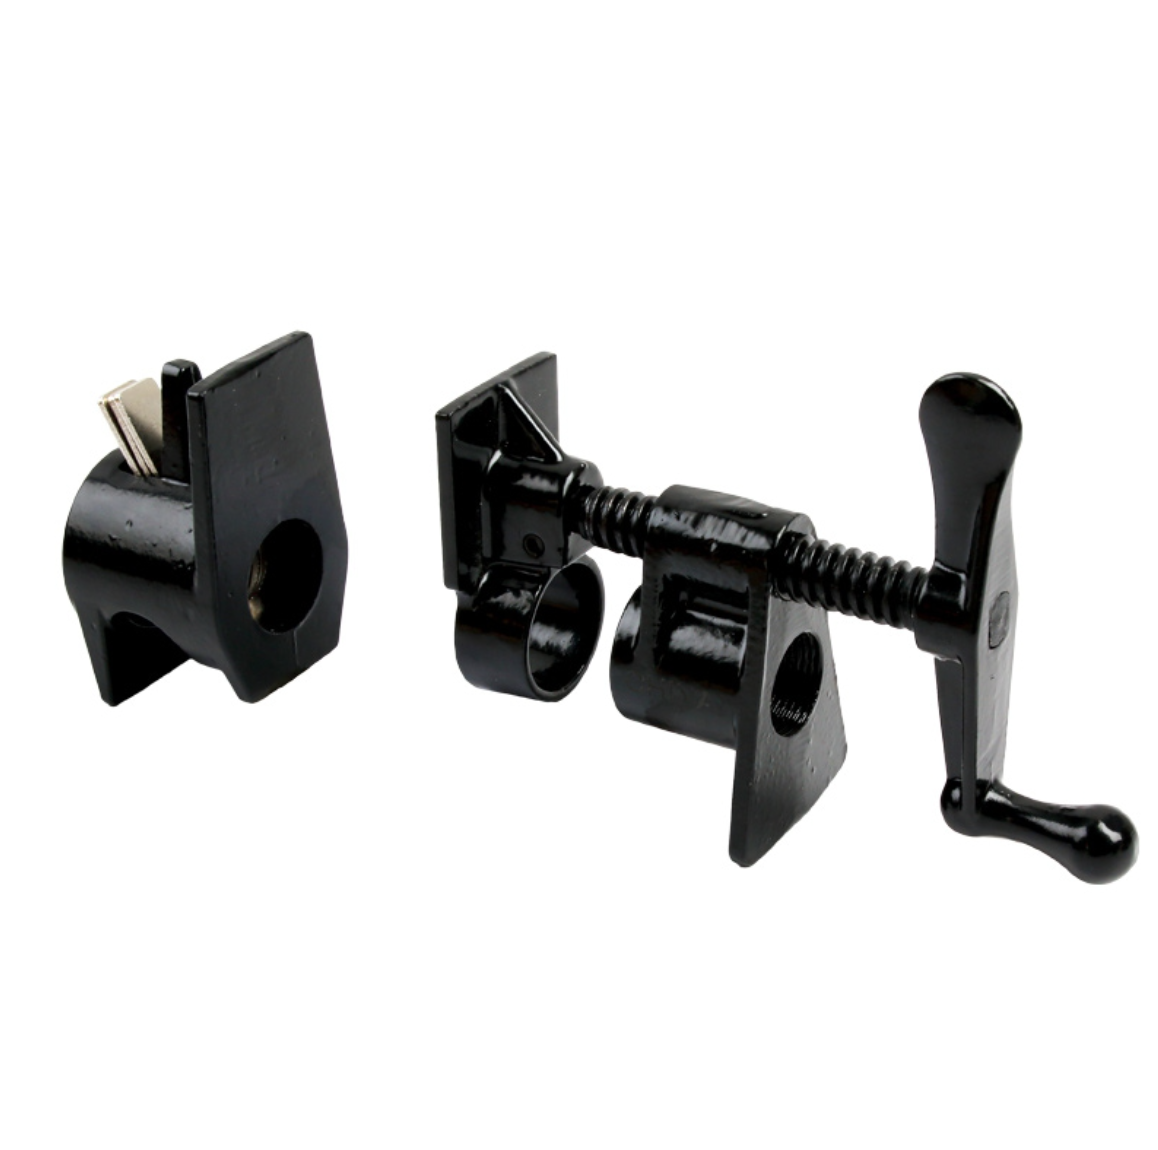 Pipe Clamp Kit for 3/4" Pipe